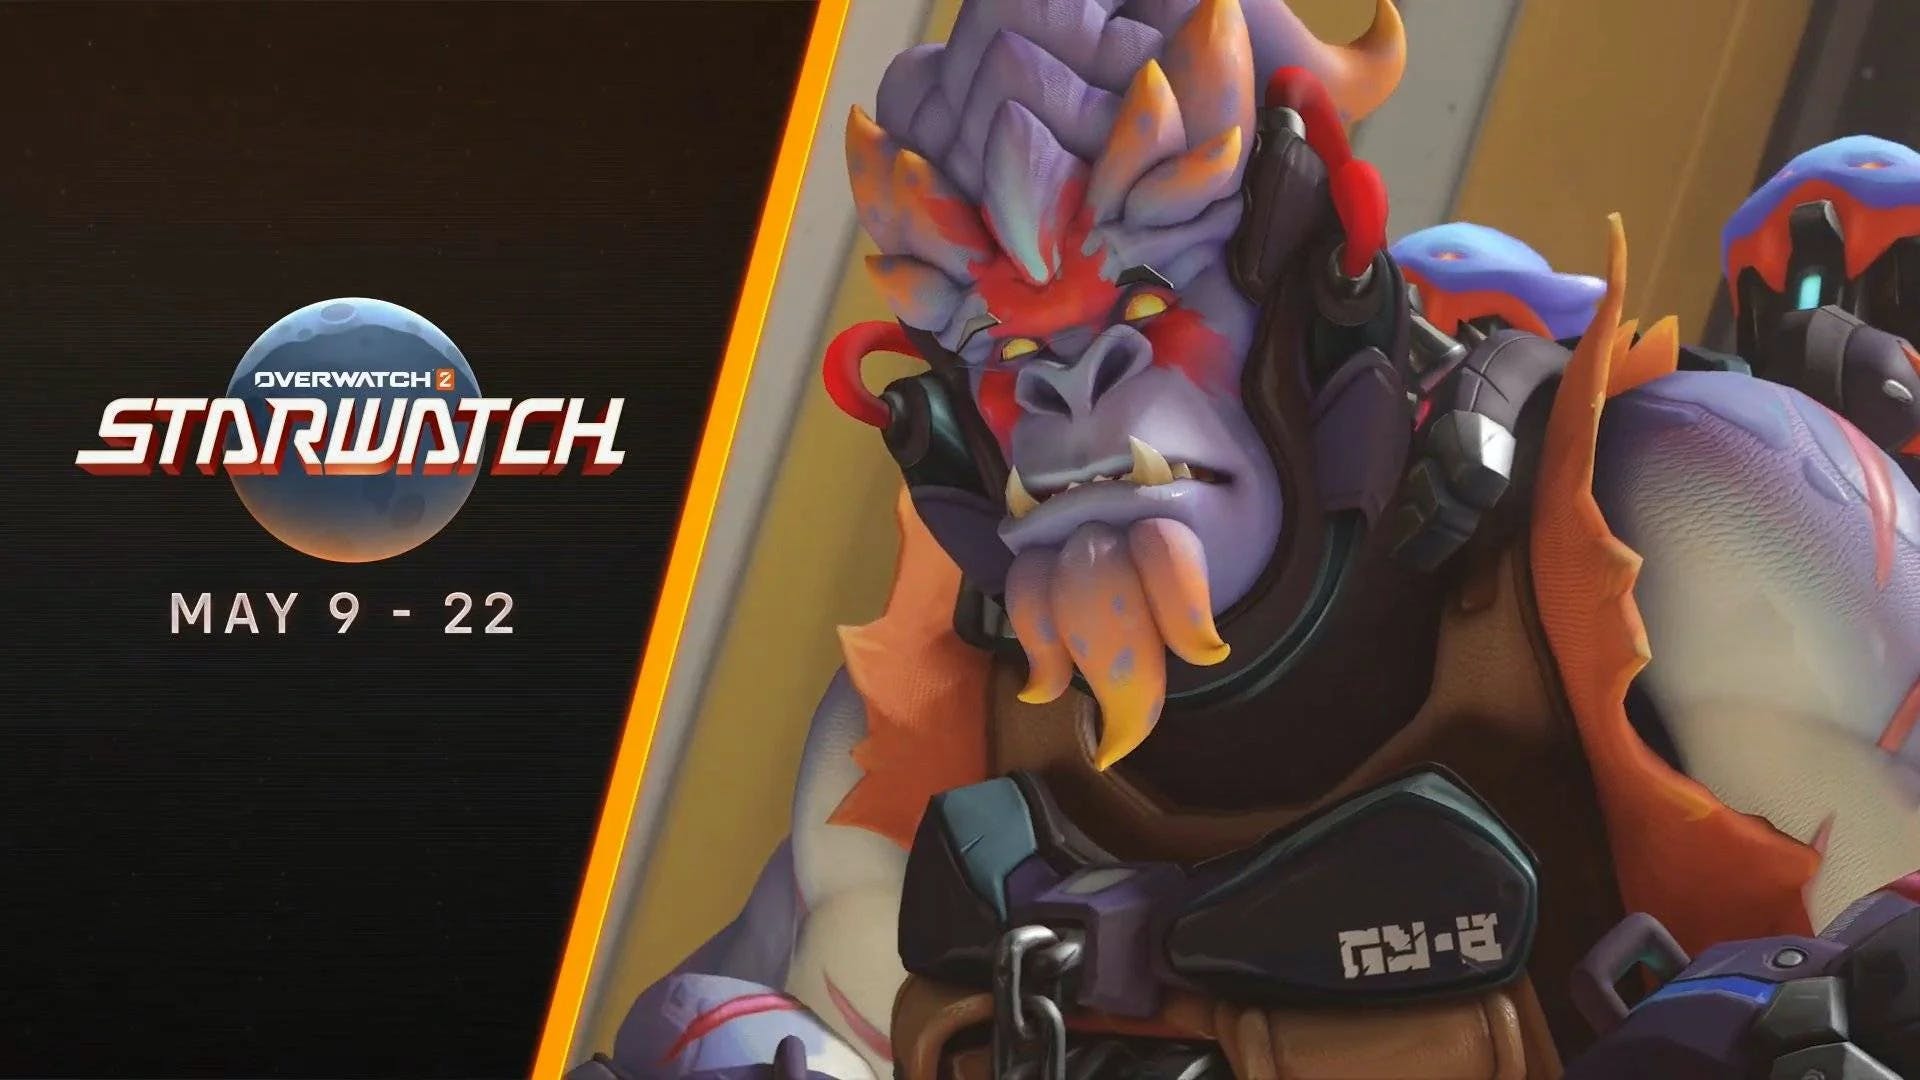 Overwatch 2 Starwatch Galactic Rescue